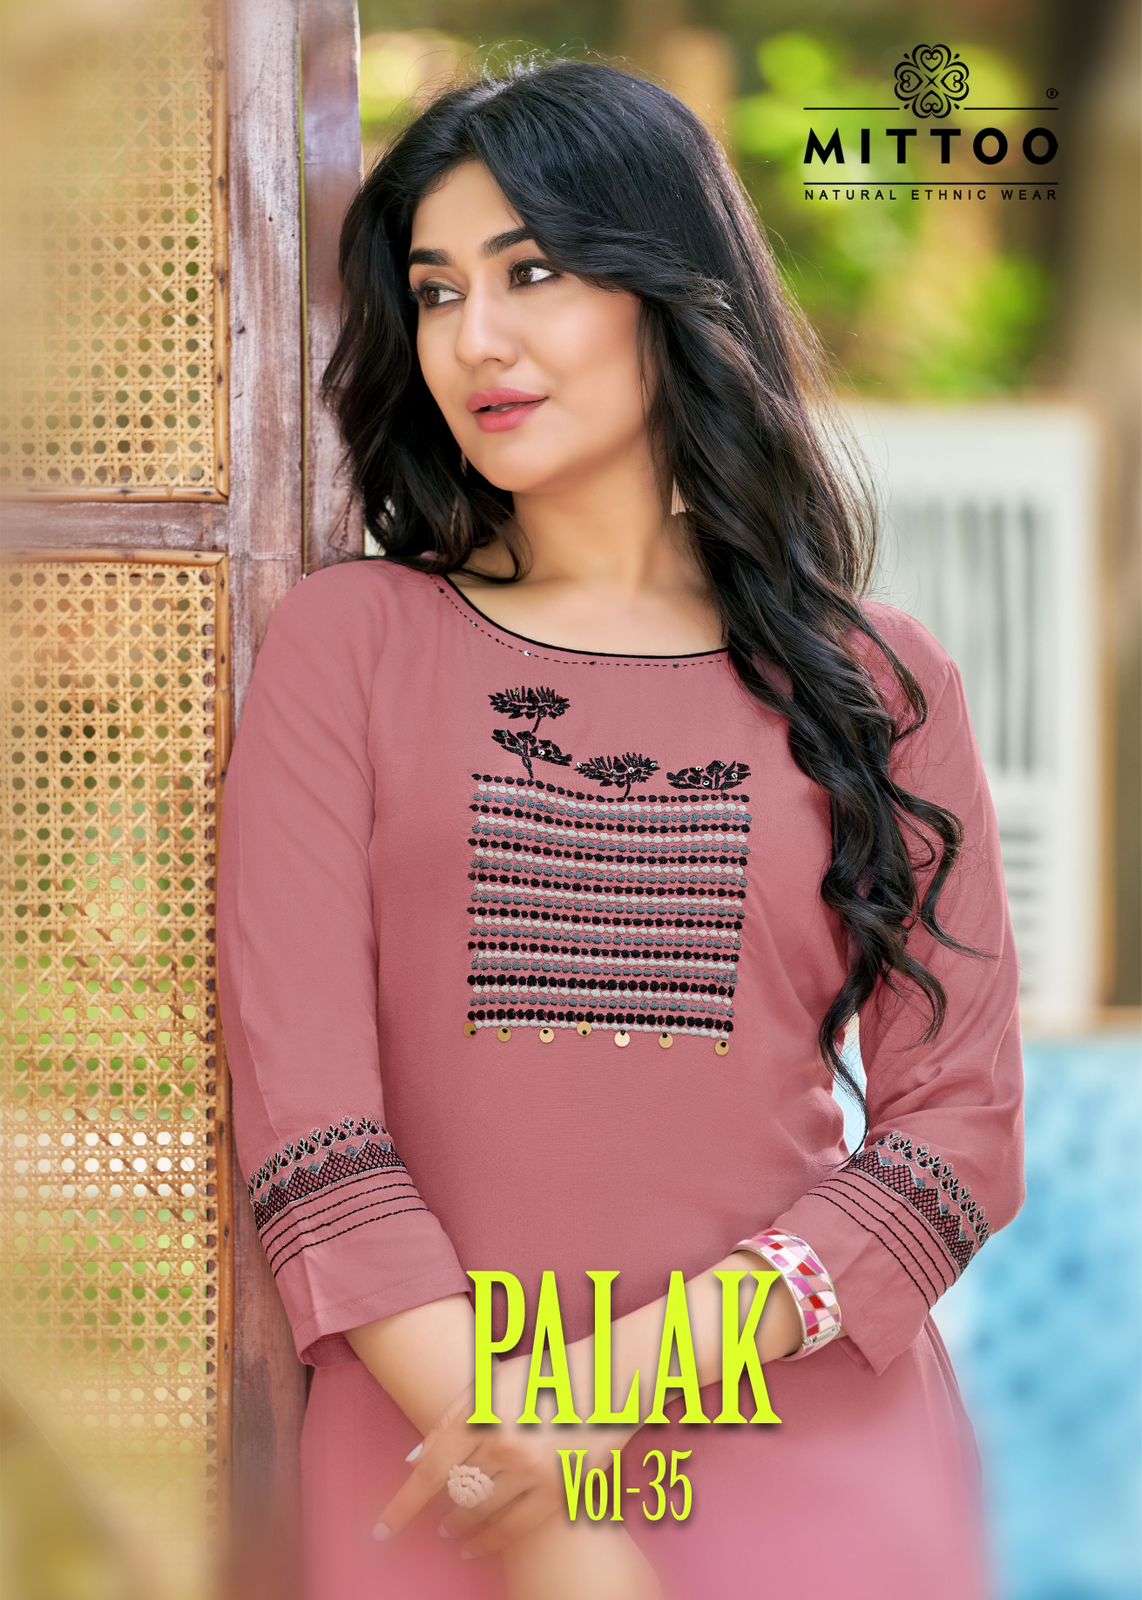 PALAK VOL 35 HEAVY RAYON FANCY EMBROIDERY WORK KURTI BY MITTOO BRAND WHOLESALER AND DEALER